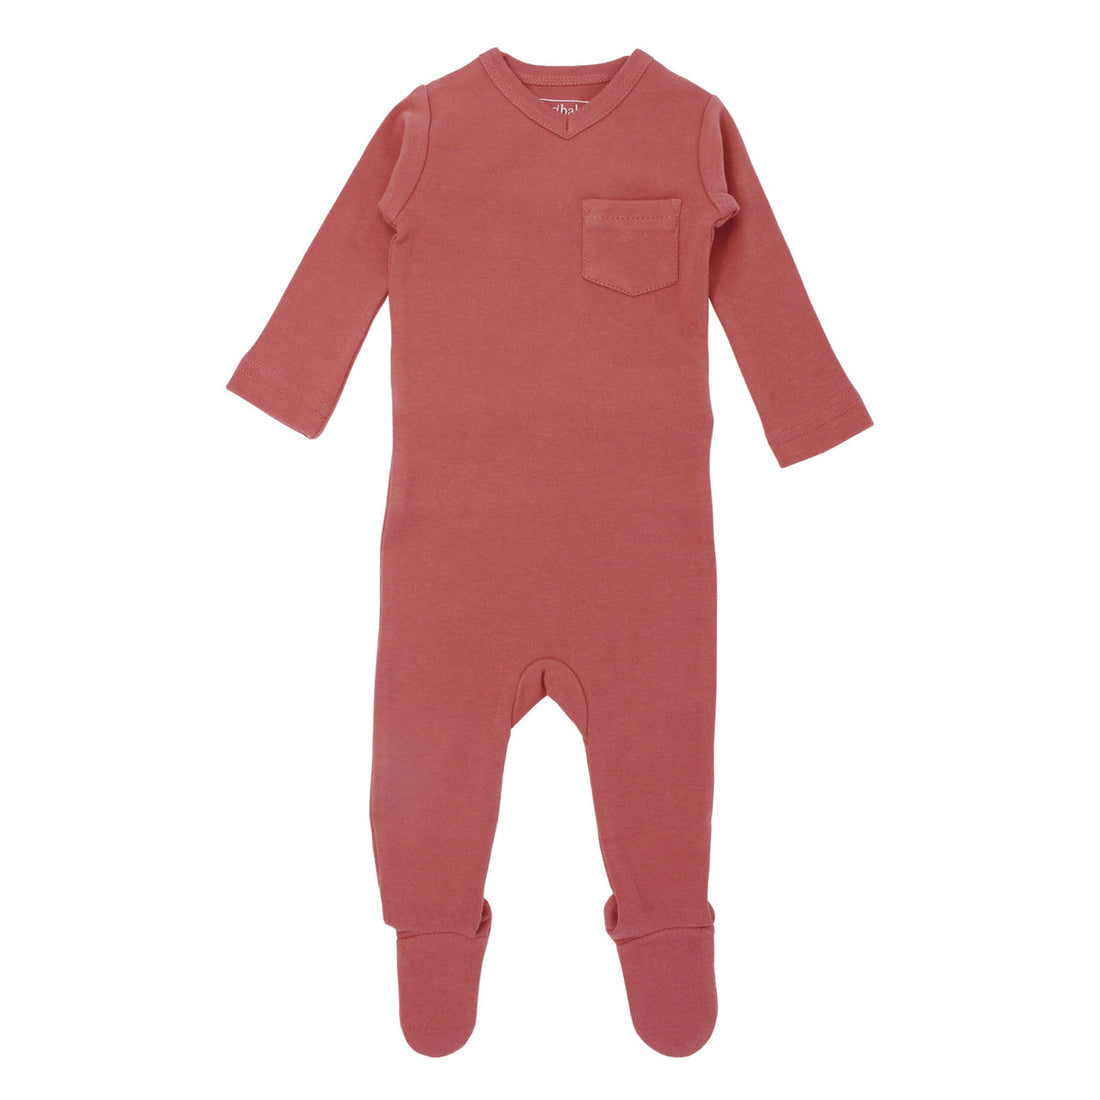 ORGANIC V-NECK FOOTIES (MULTIPLE COLORS)